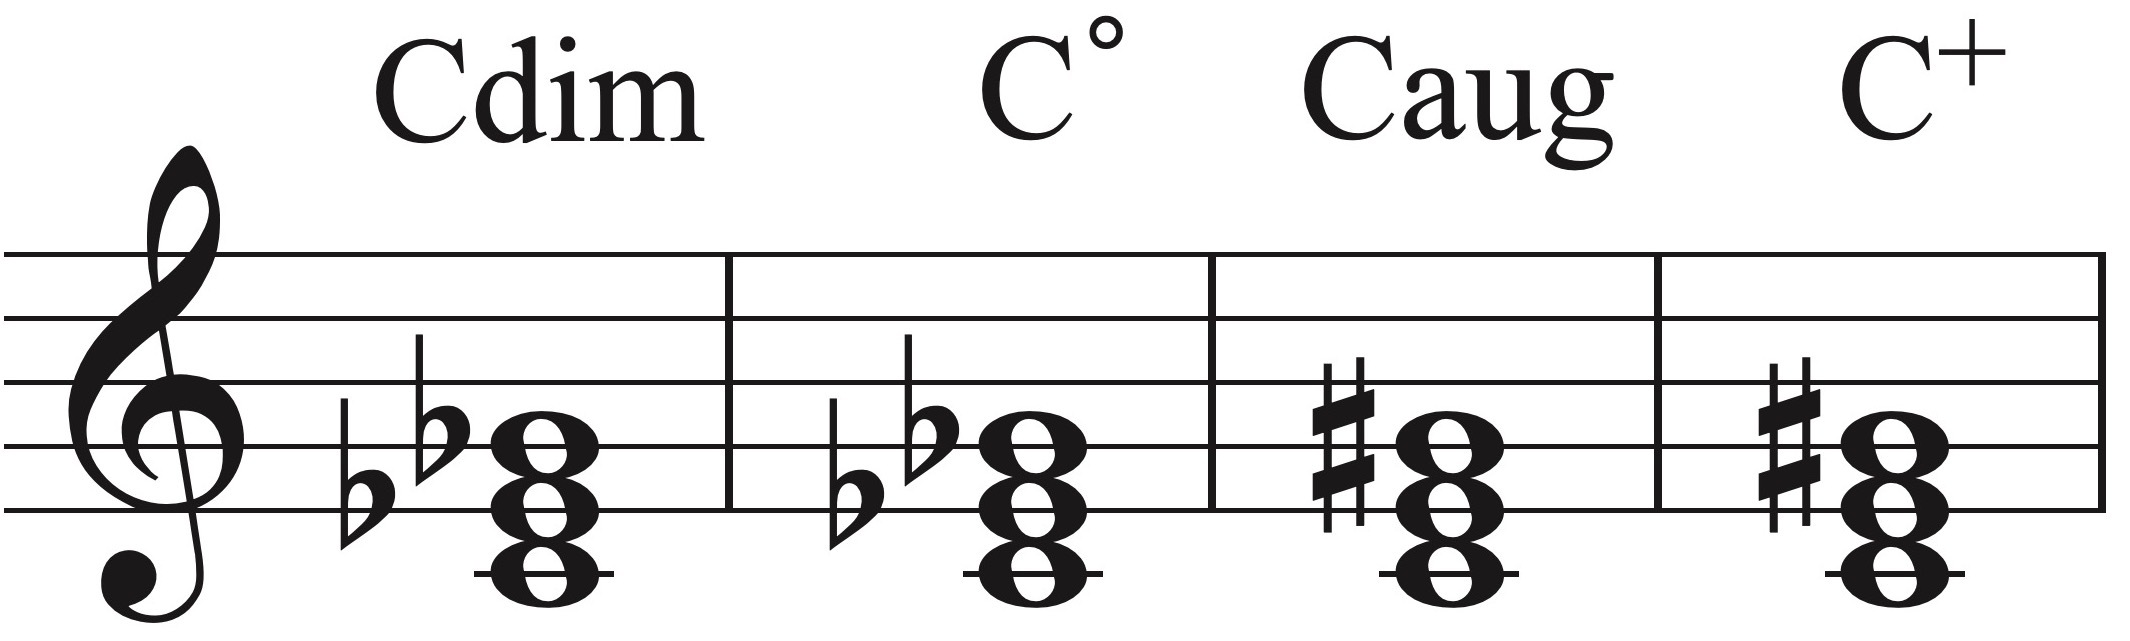 C diminished and C augmented piano chords.